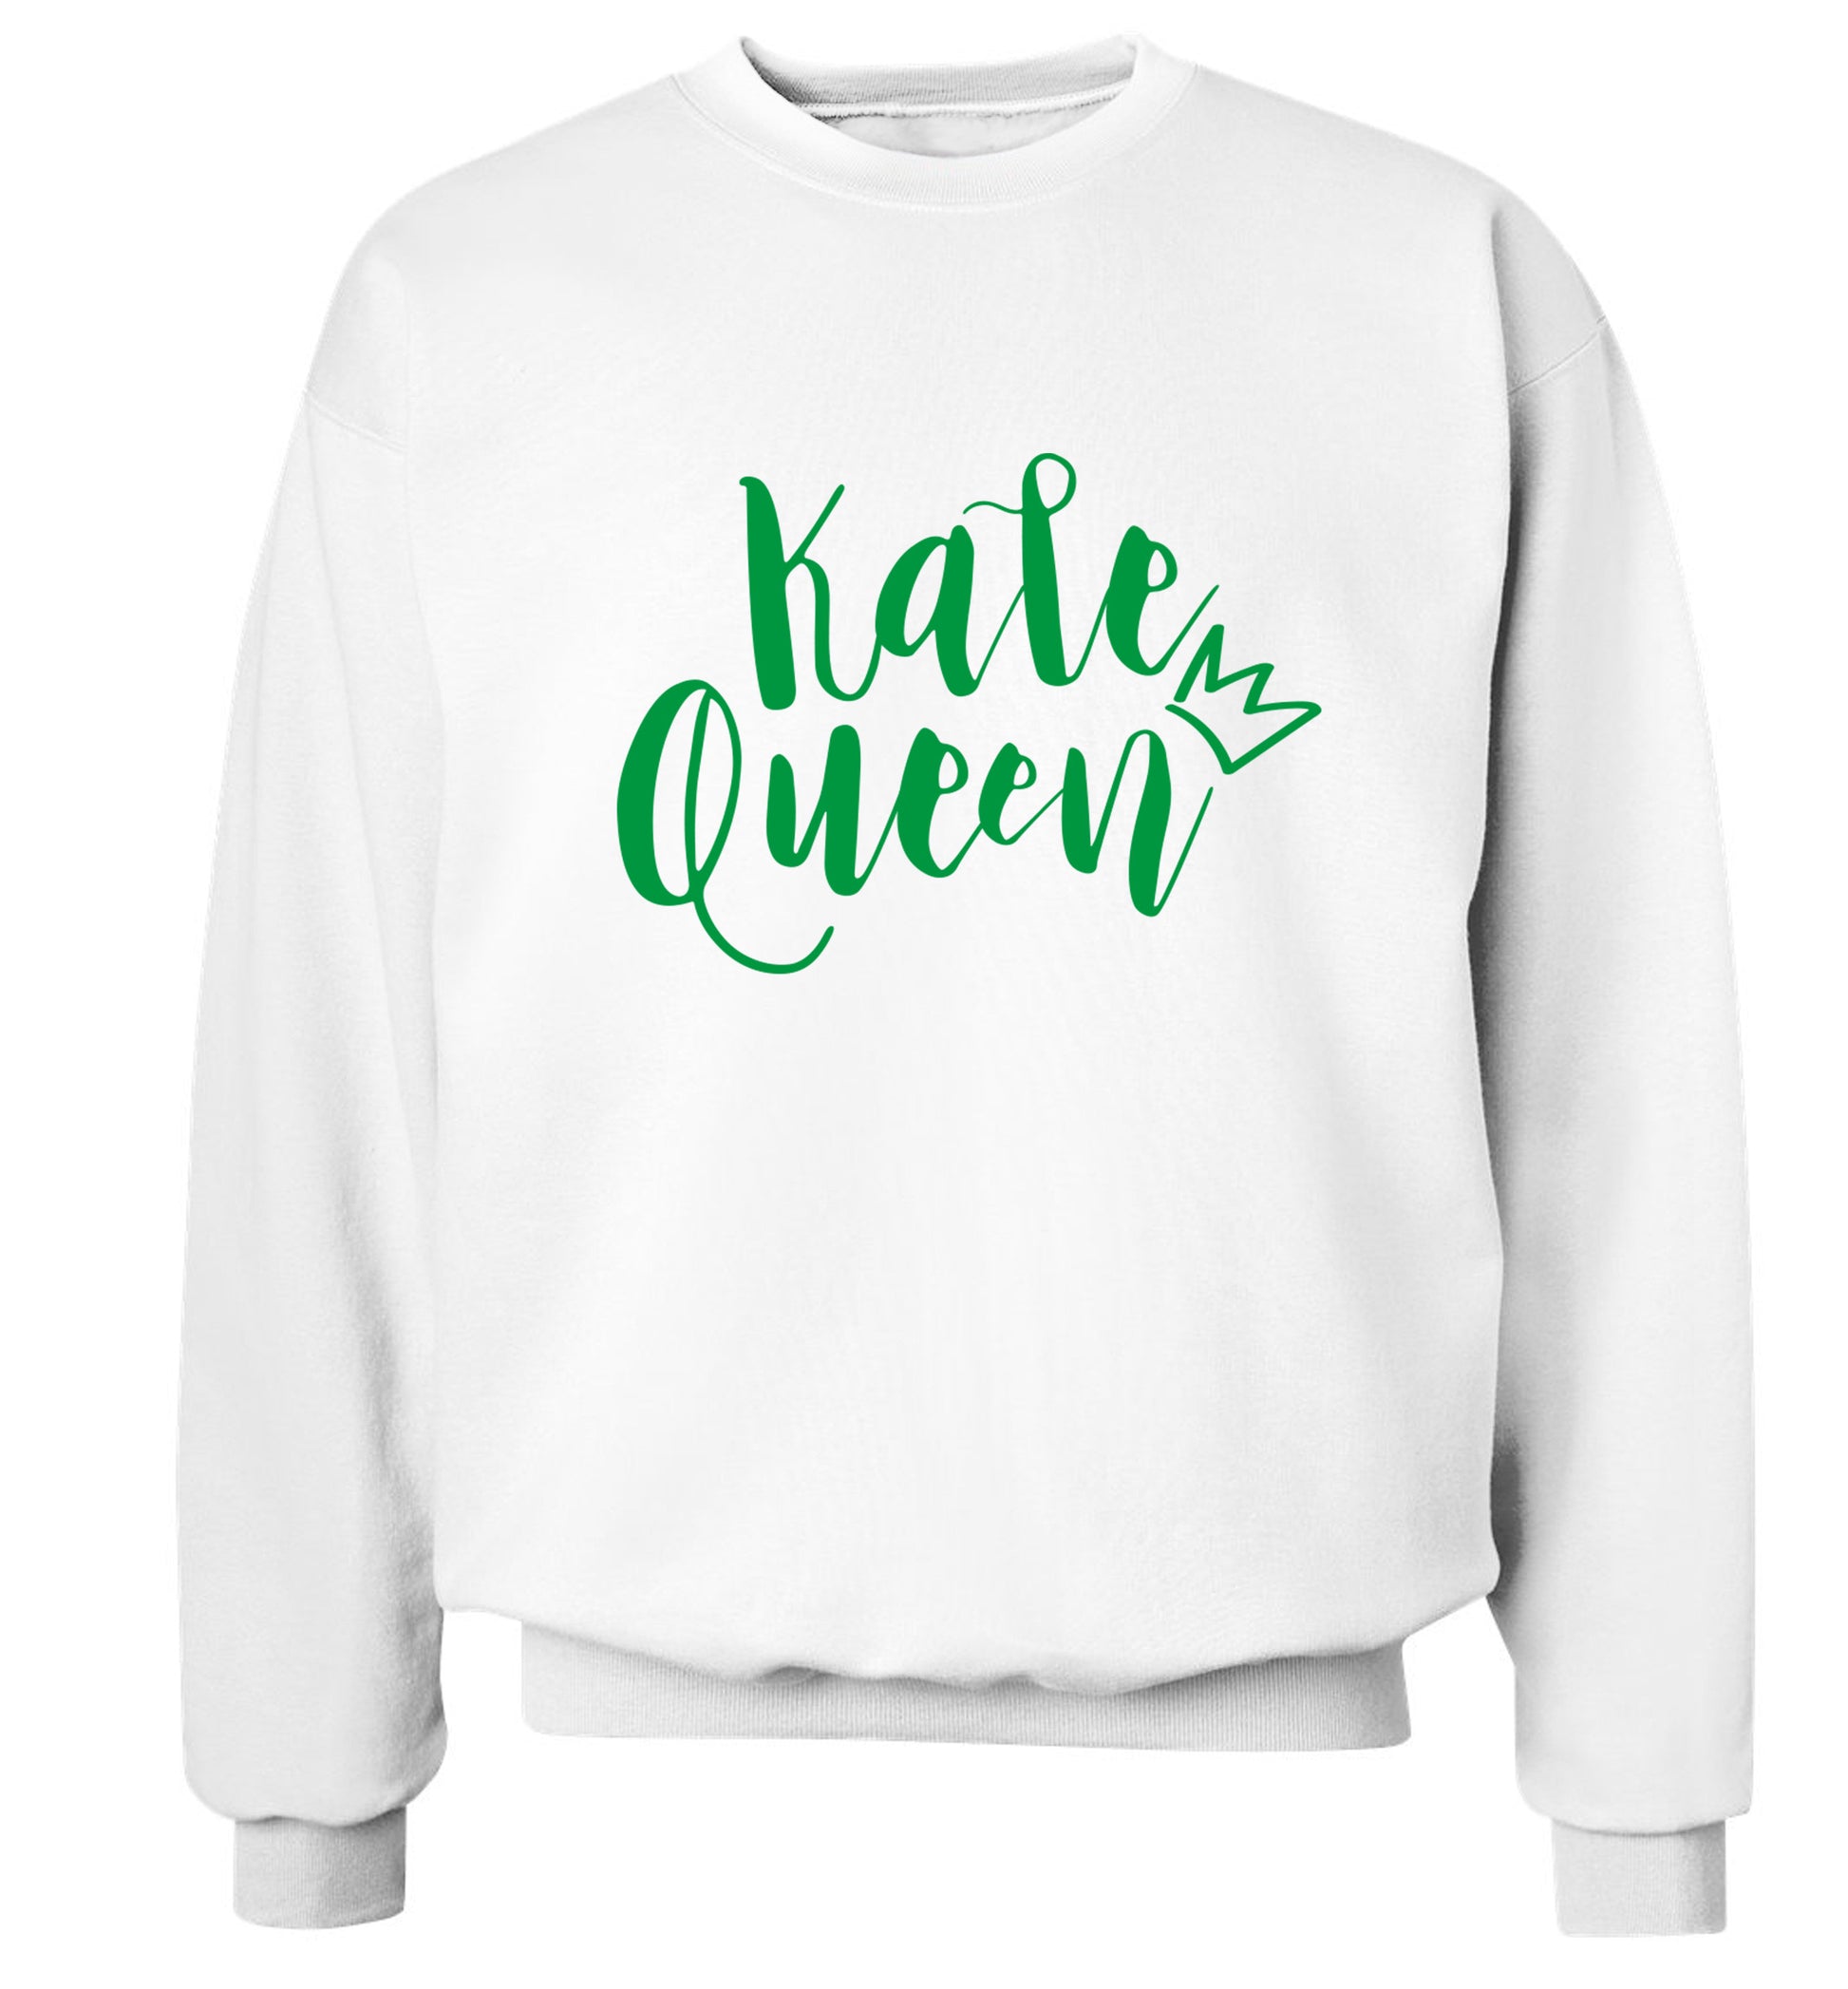 Kale Queen Adult's unisex white  sweater 2XL